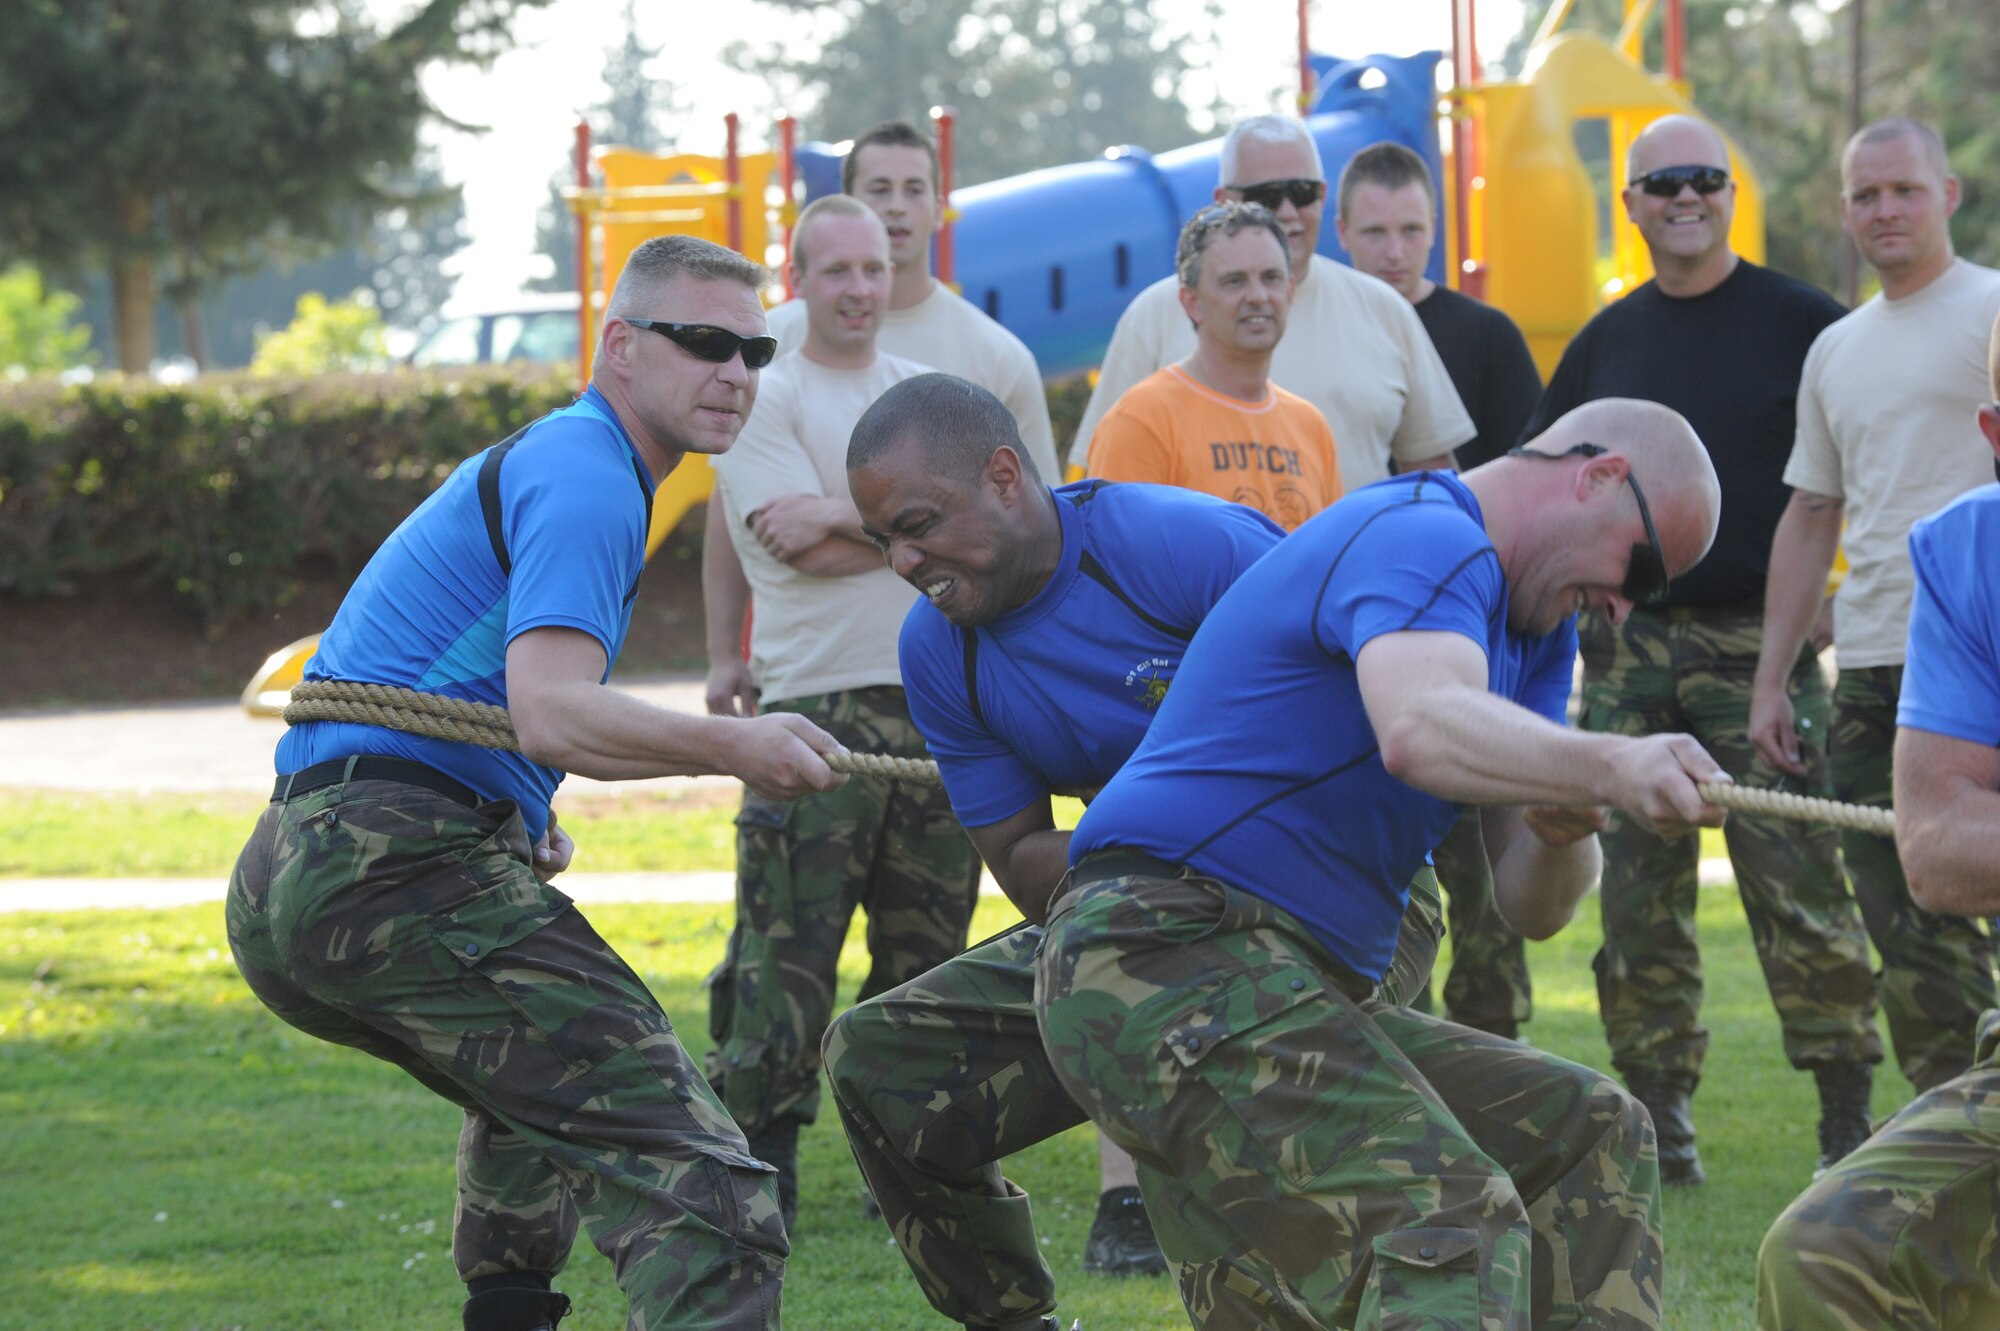 Dutch soldiers participate in a touwtrekken toernooi (tug-of-war tournament) during Koninginnedag, or Queen’s Day,  celebration held at Arkadas Park April 25, 2013, Incirlik Air Base Turkey. The Dutch, who are deployed to Incirlik Air Base as part of a NATO-led operation to boost Turkey’s air defense capabilities by providing Patriot missile batteries, invited U.S. and Turkish personnel to attend the event that included Dutch food, the touwtrekken toernooi , live music and a bonfire. (U.S. Air Force photo by 1st Lt. David Liapis/Released)